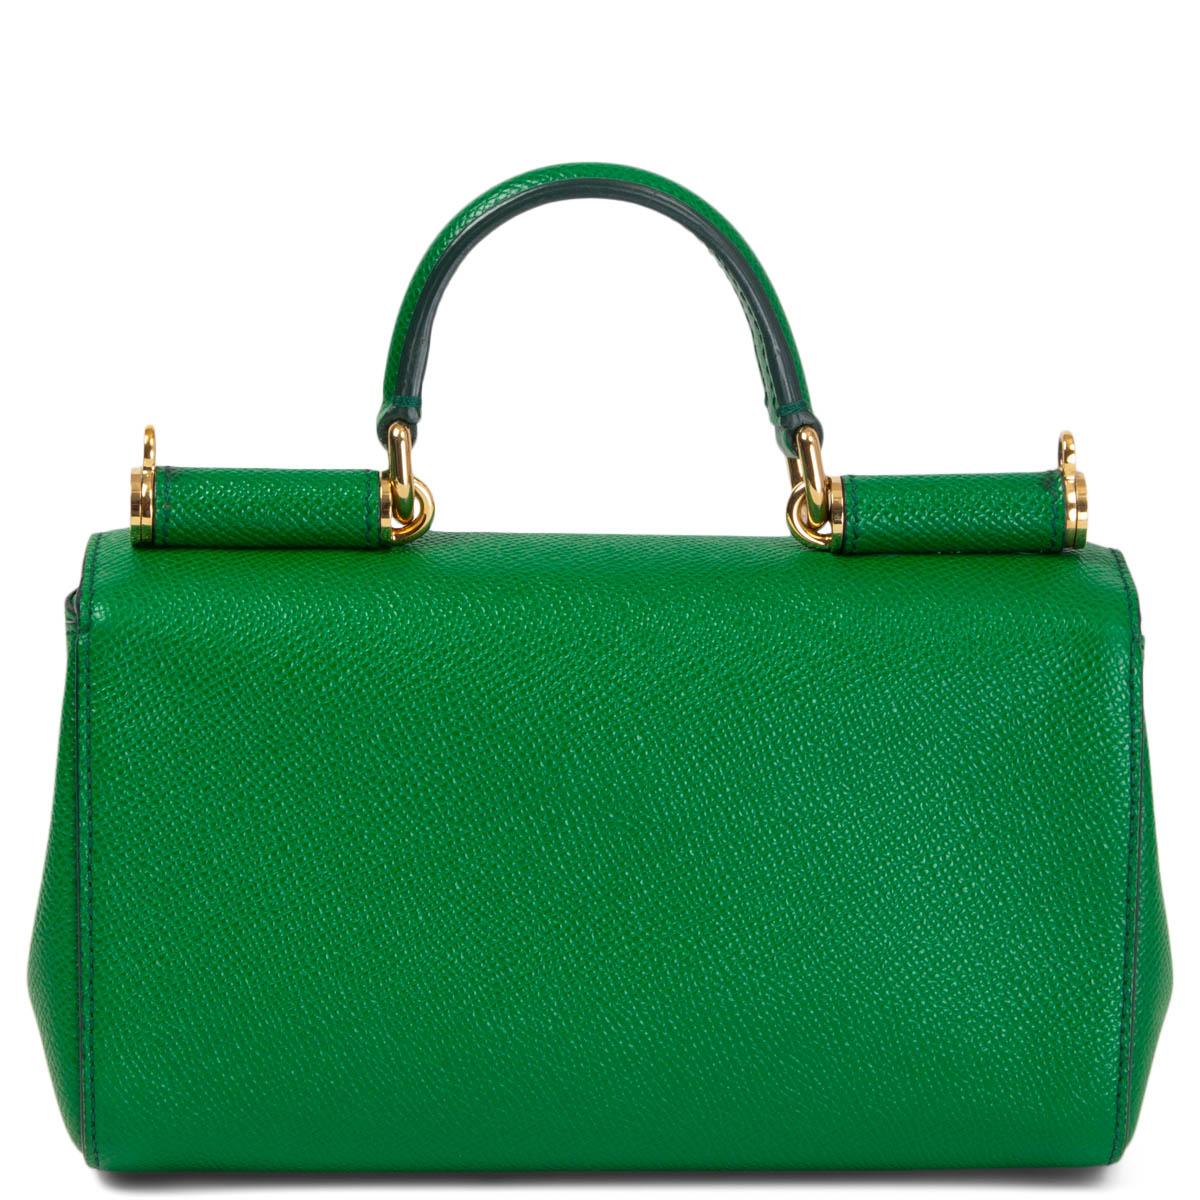 Green DOLCE & GABBANA green leather MISS SICILY WOC Wallet on Chain Bag